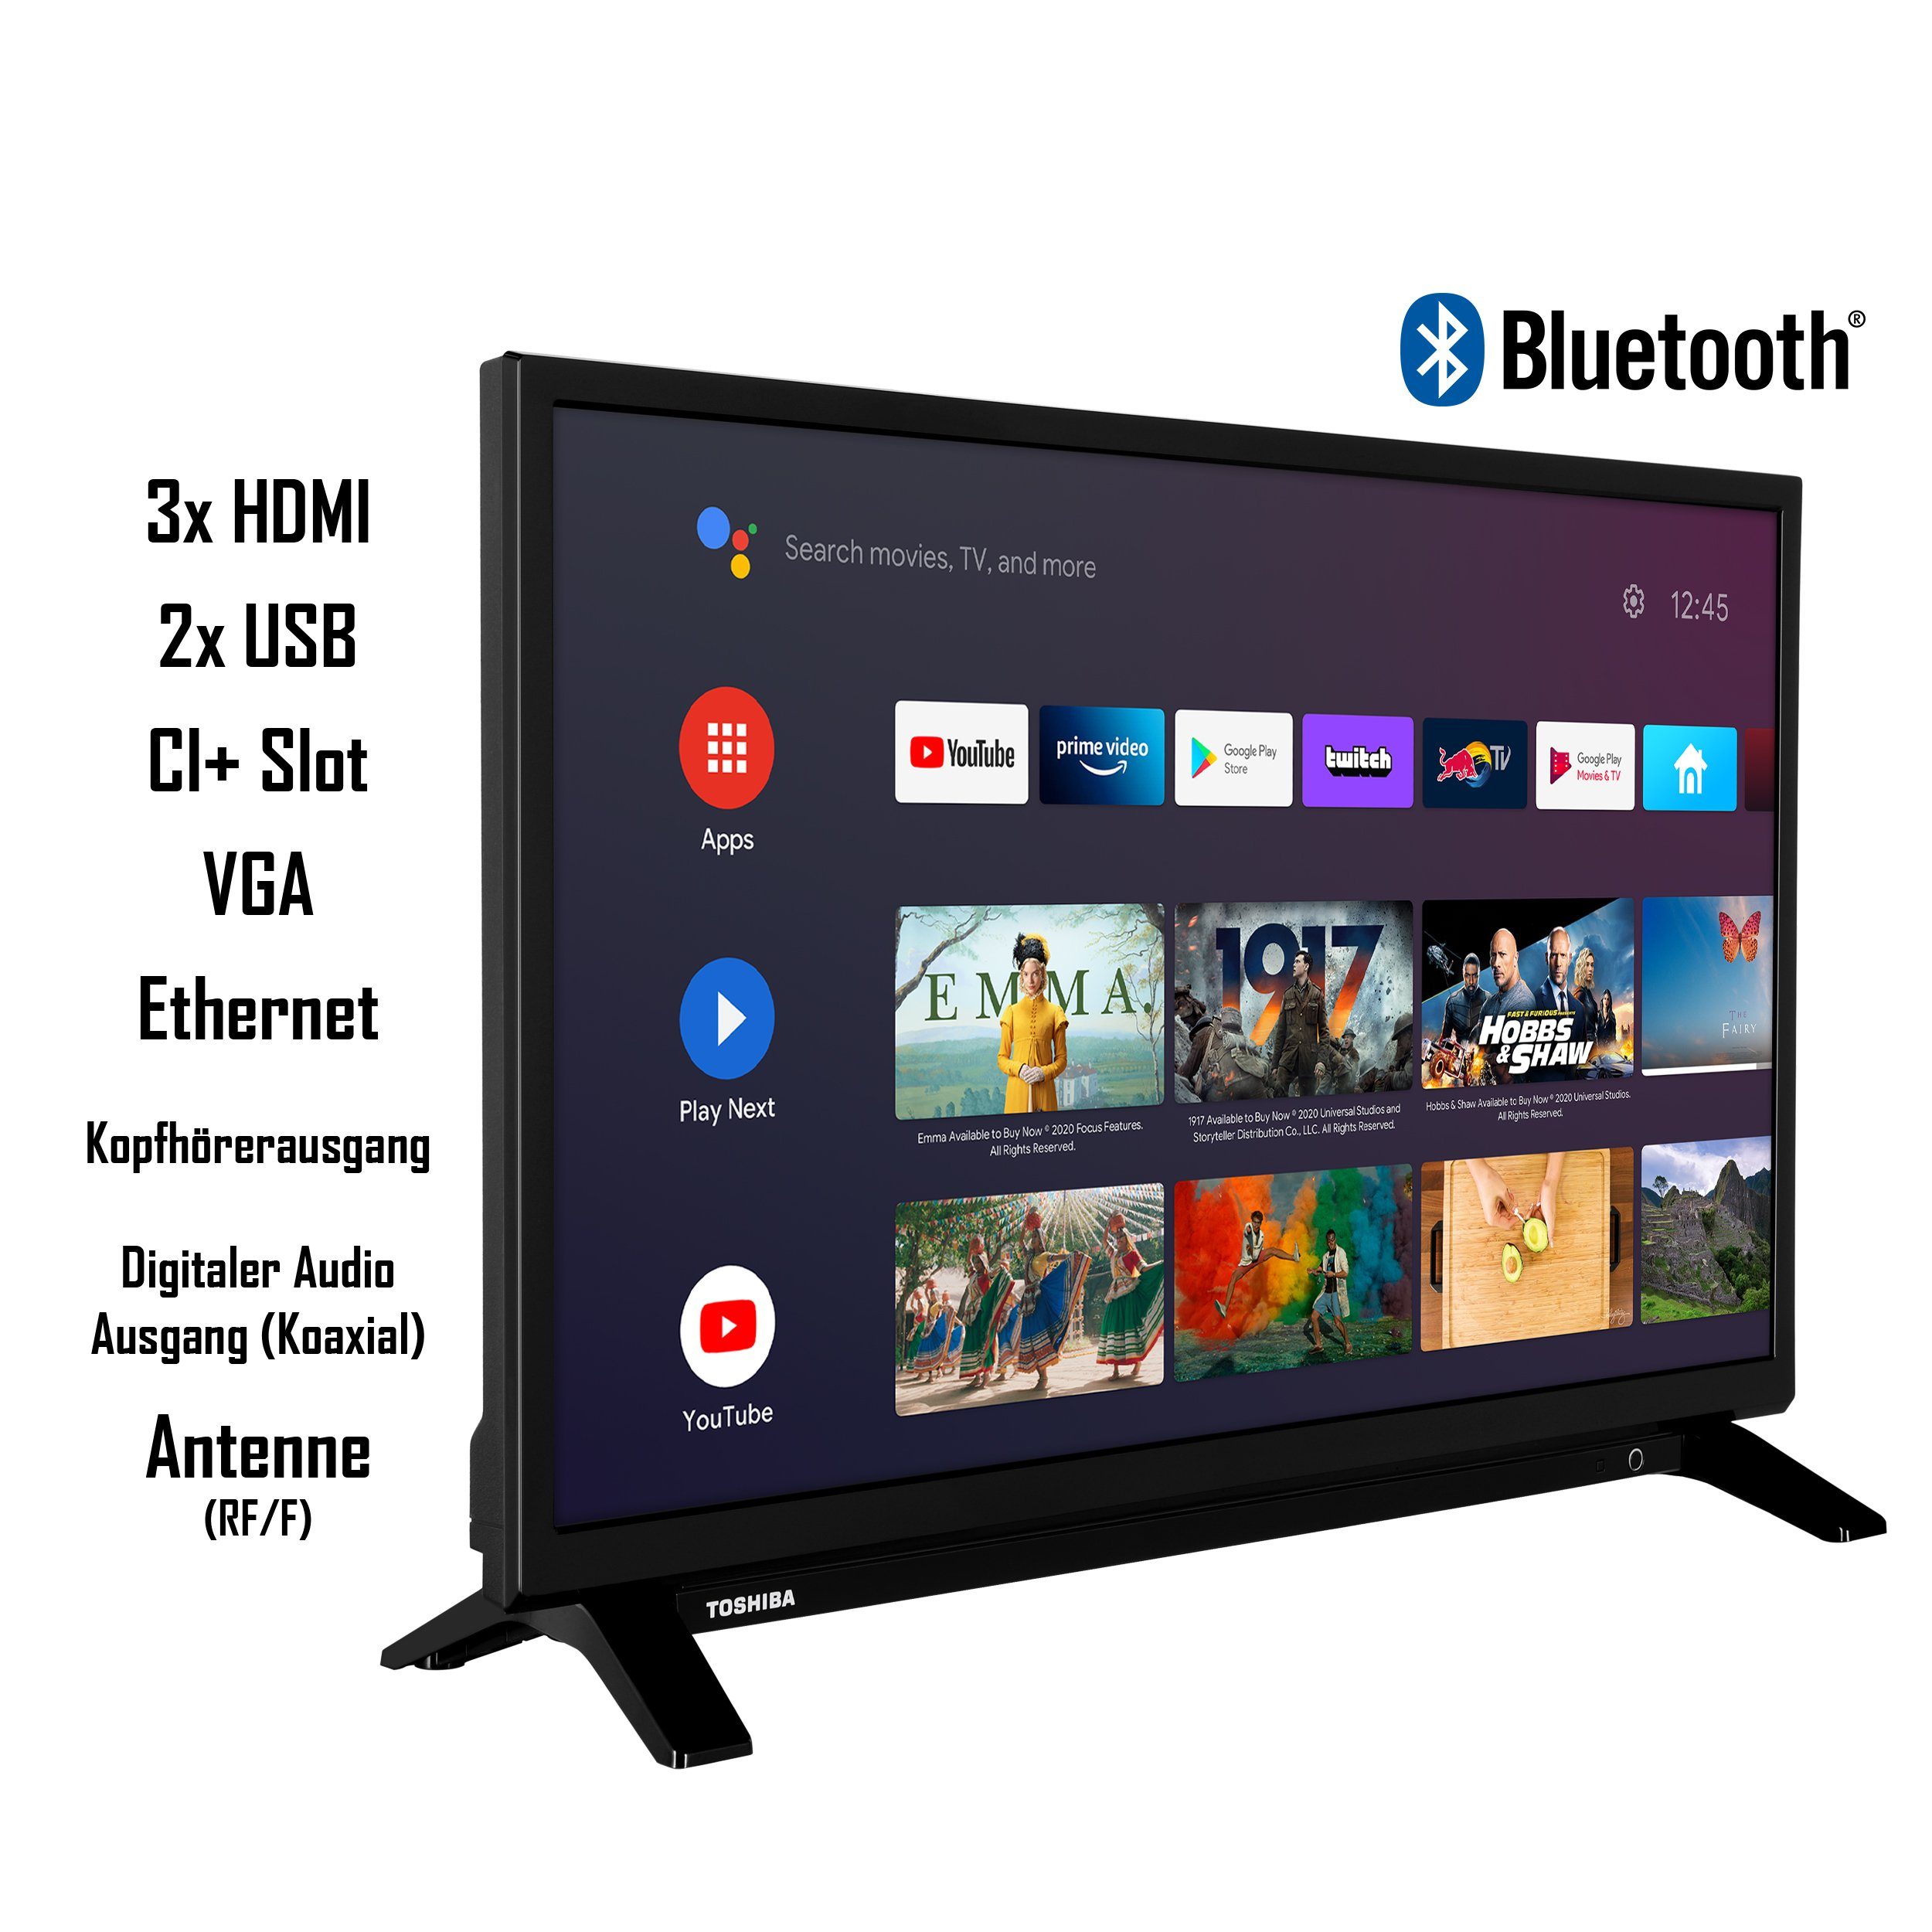 Toshiba 24WA2063DAX/2 LCD-LED Fernseher Bluetooth) (60 HD-ready, Google Store, cm/24 Play Android Zoll, Triple-Tuner, TV, Assistant